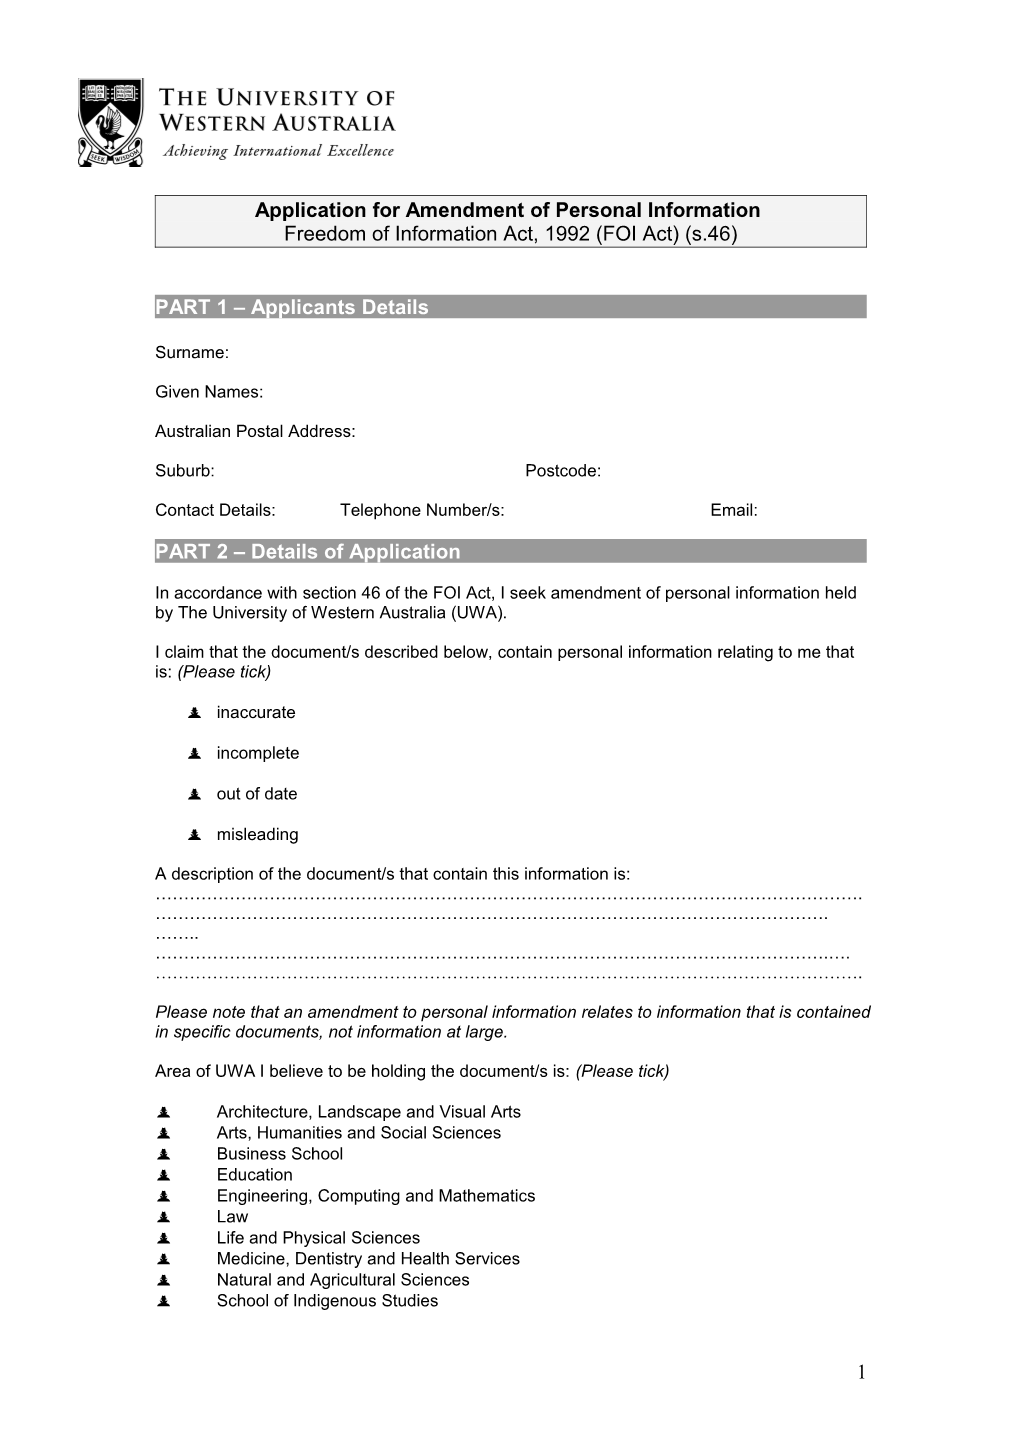 Application for Amendment of Personal Information